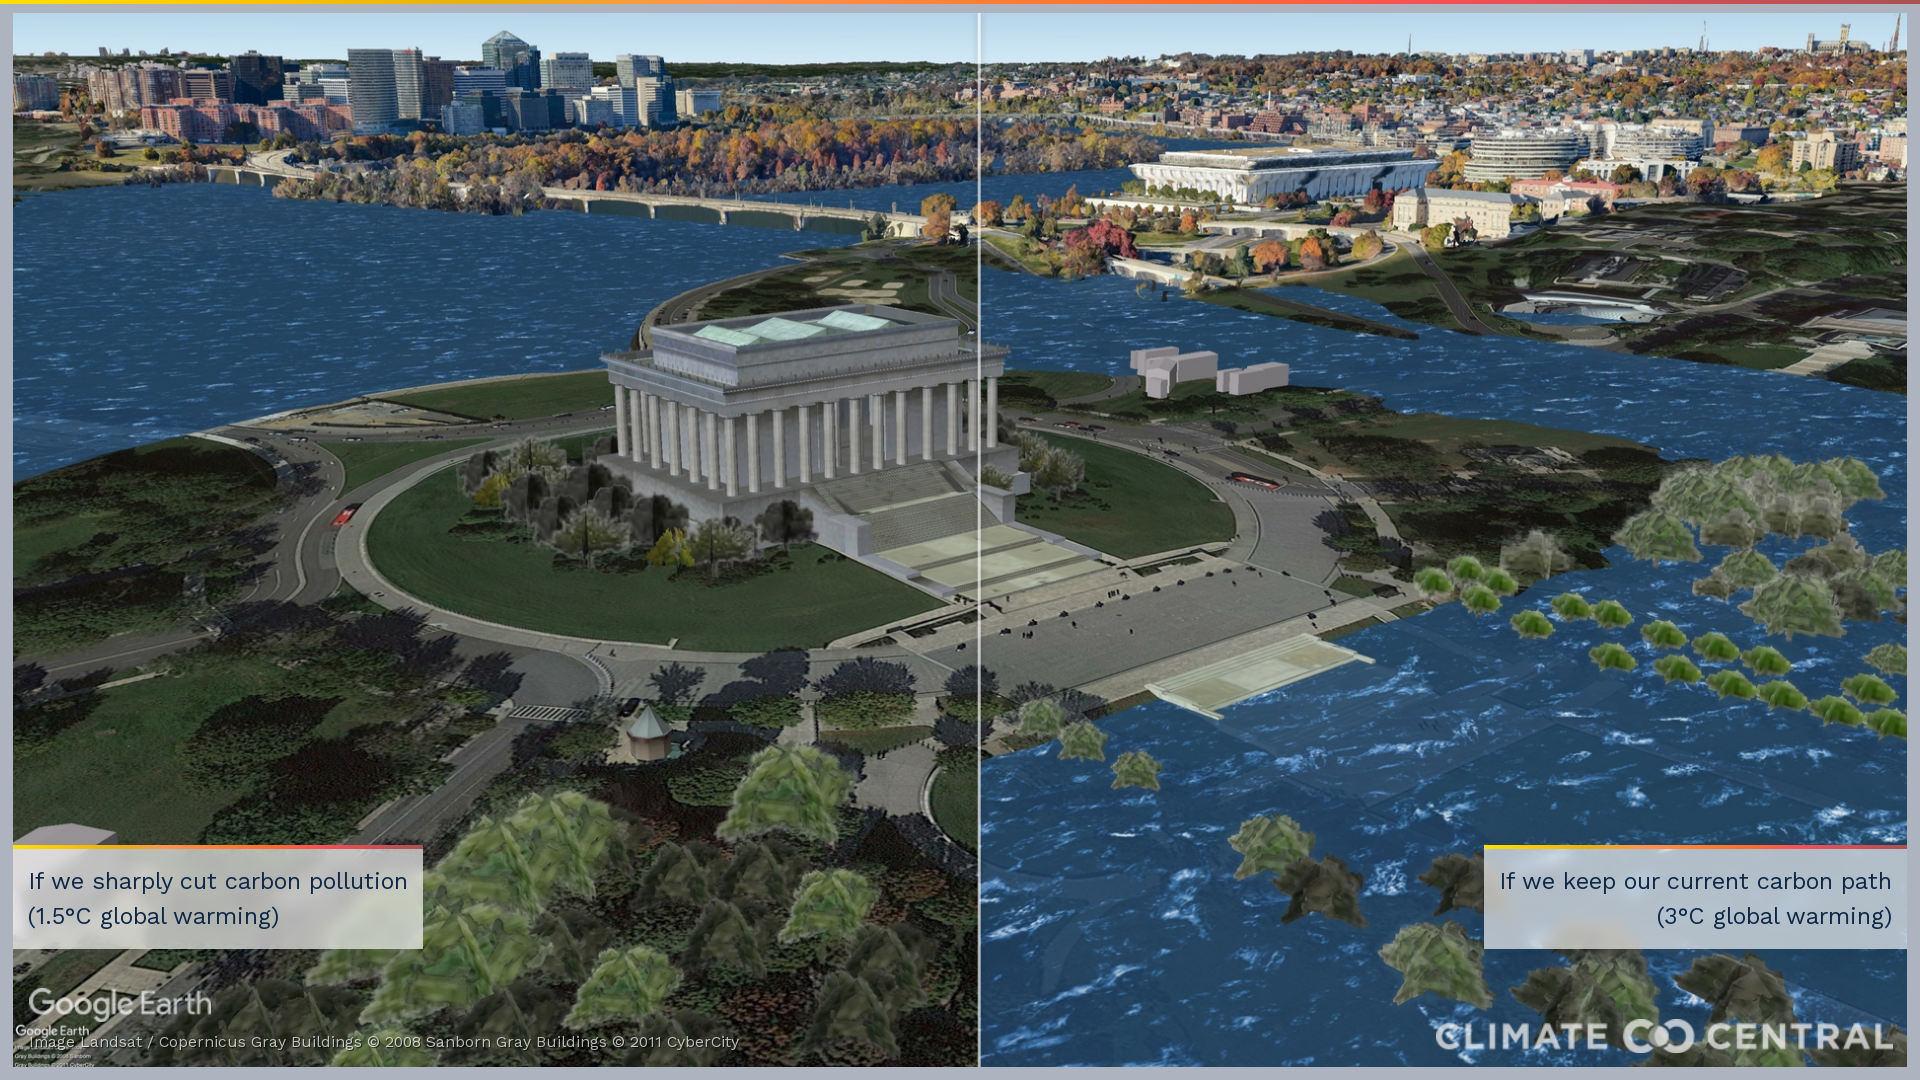 Water levels at the Lincoln Memorial in Washington, DC, USA if global warming hits 1.5C (left) or 3C (right).